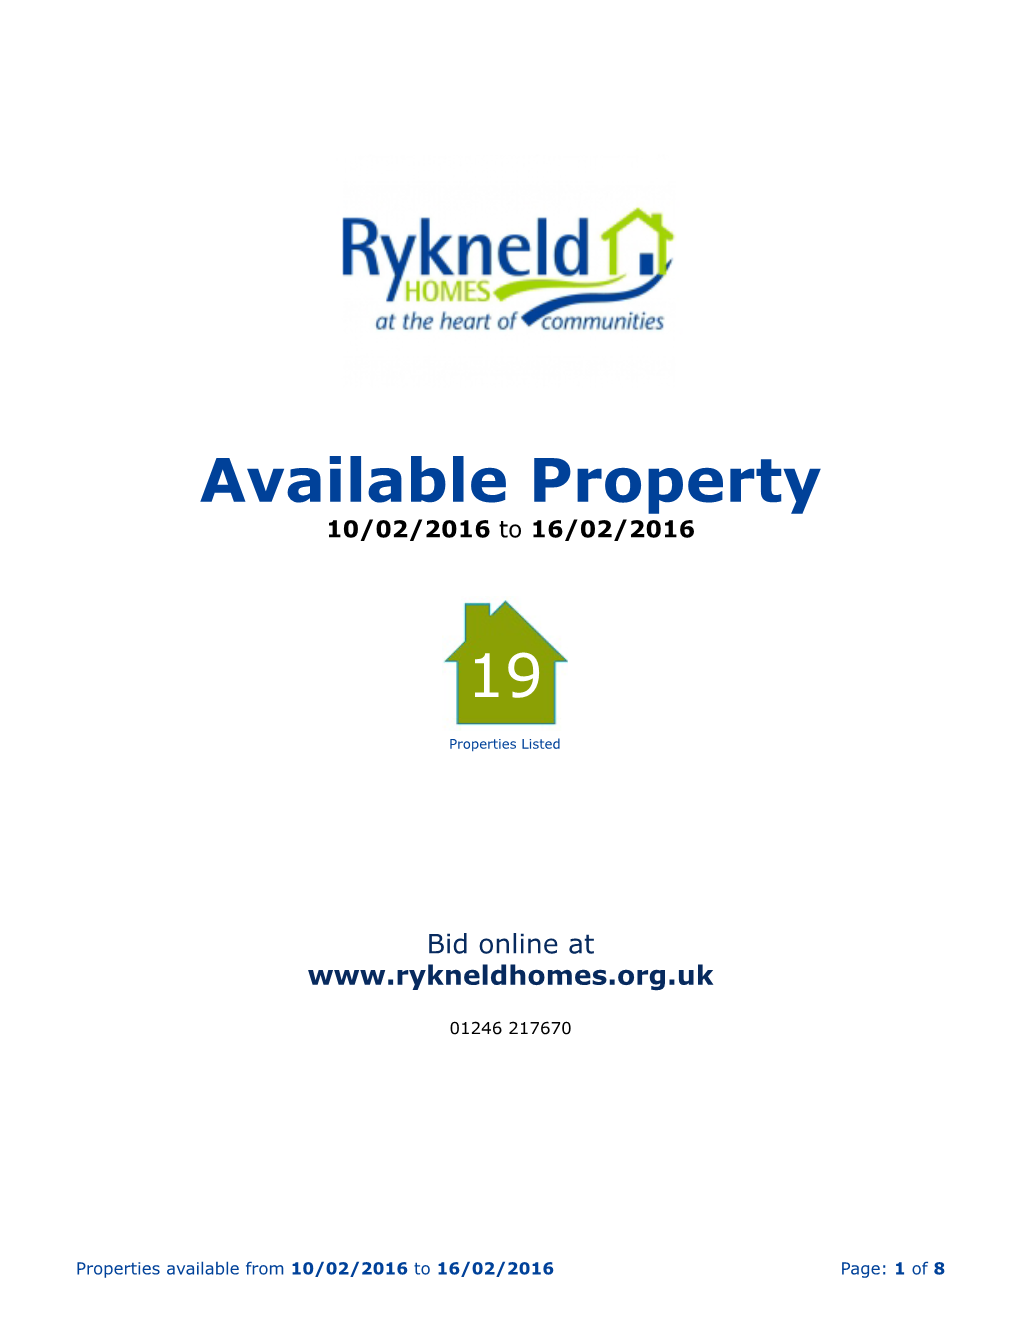 Available Property 19